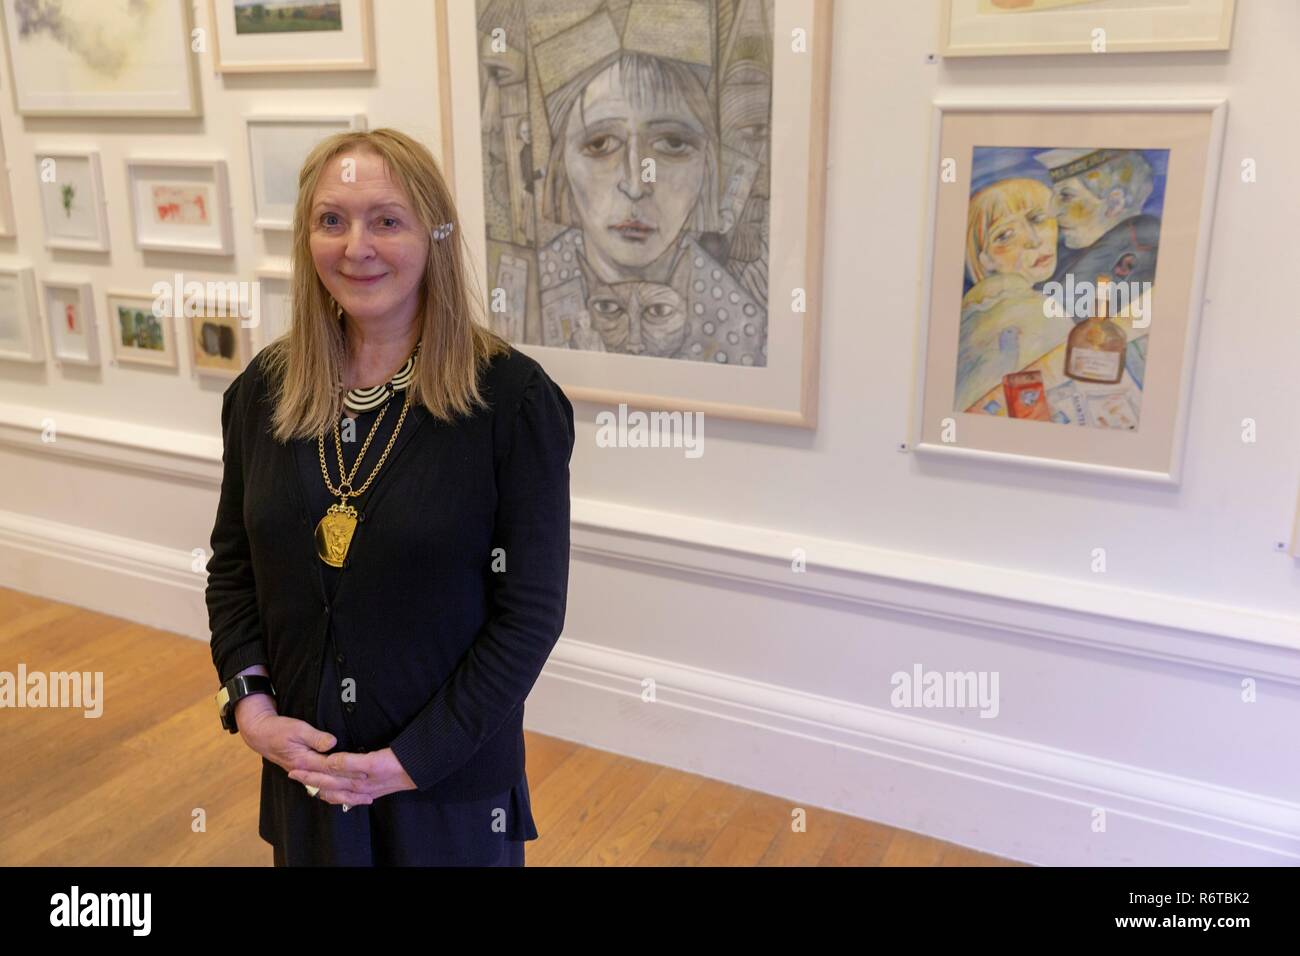 Edinburgh, Scotland, UK. 6th Dec 2018. Joyce W. Cairns PRSA has been elected President of the Royal Scottish Academy of Art and Architecture, the first woman to be elected to the position in the 192-year history of the RSA.   Born in Edinburgh, Cairns studied painting at Gray's School of Art, Aberdeen (1966-71), and at the Royal College of Art, London (1971-74). Following a fellowship at Gloucester College of Art and Design she studied at Goldsmiths College, University of London. Credit: Rich Dyson/Alamy Live News Stock Photo